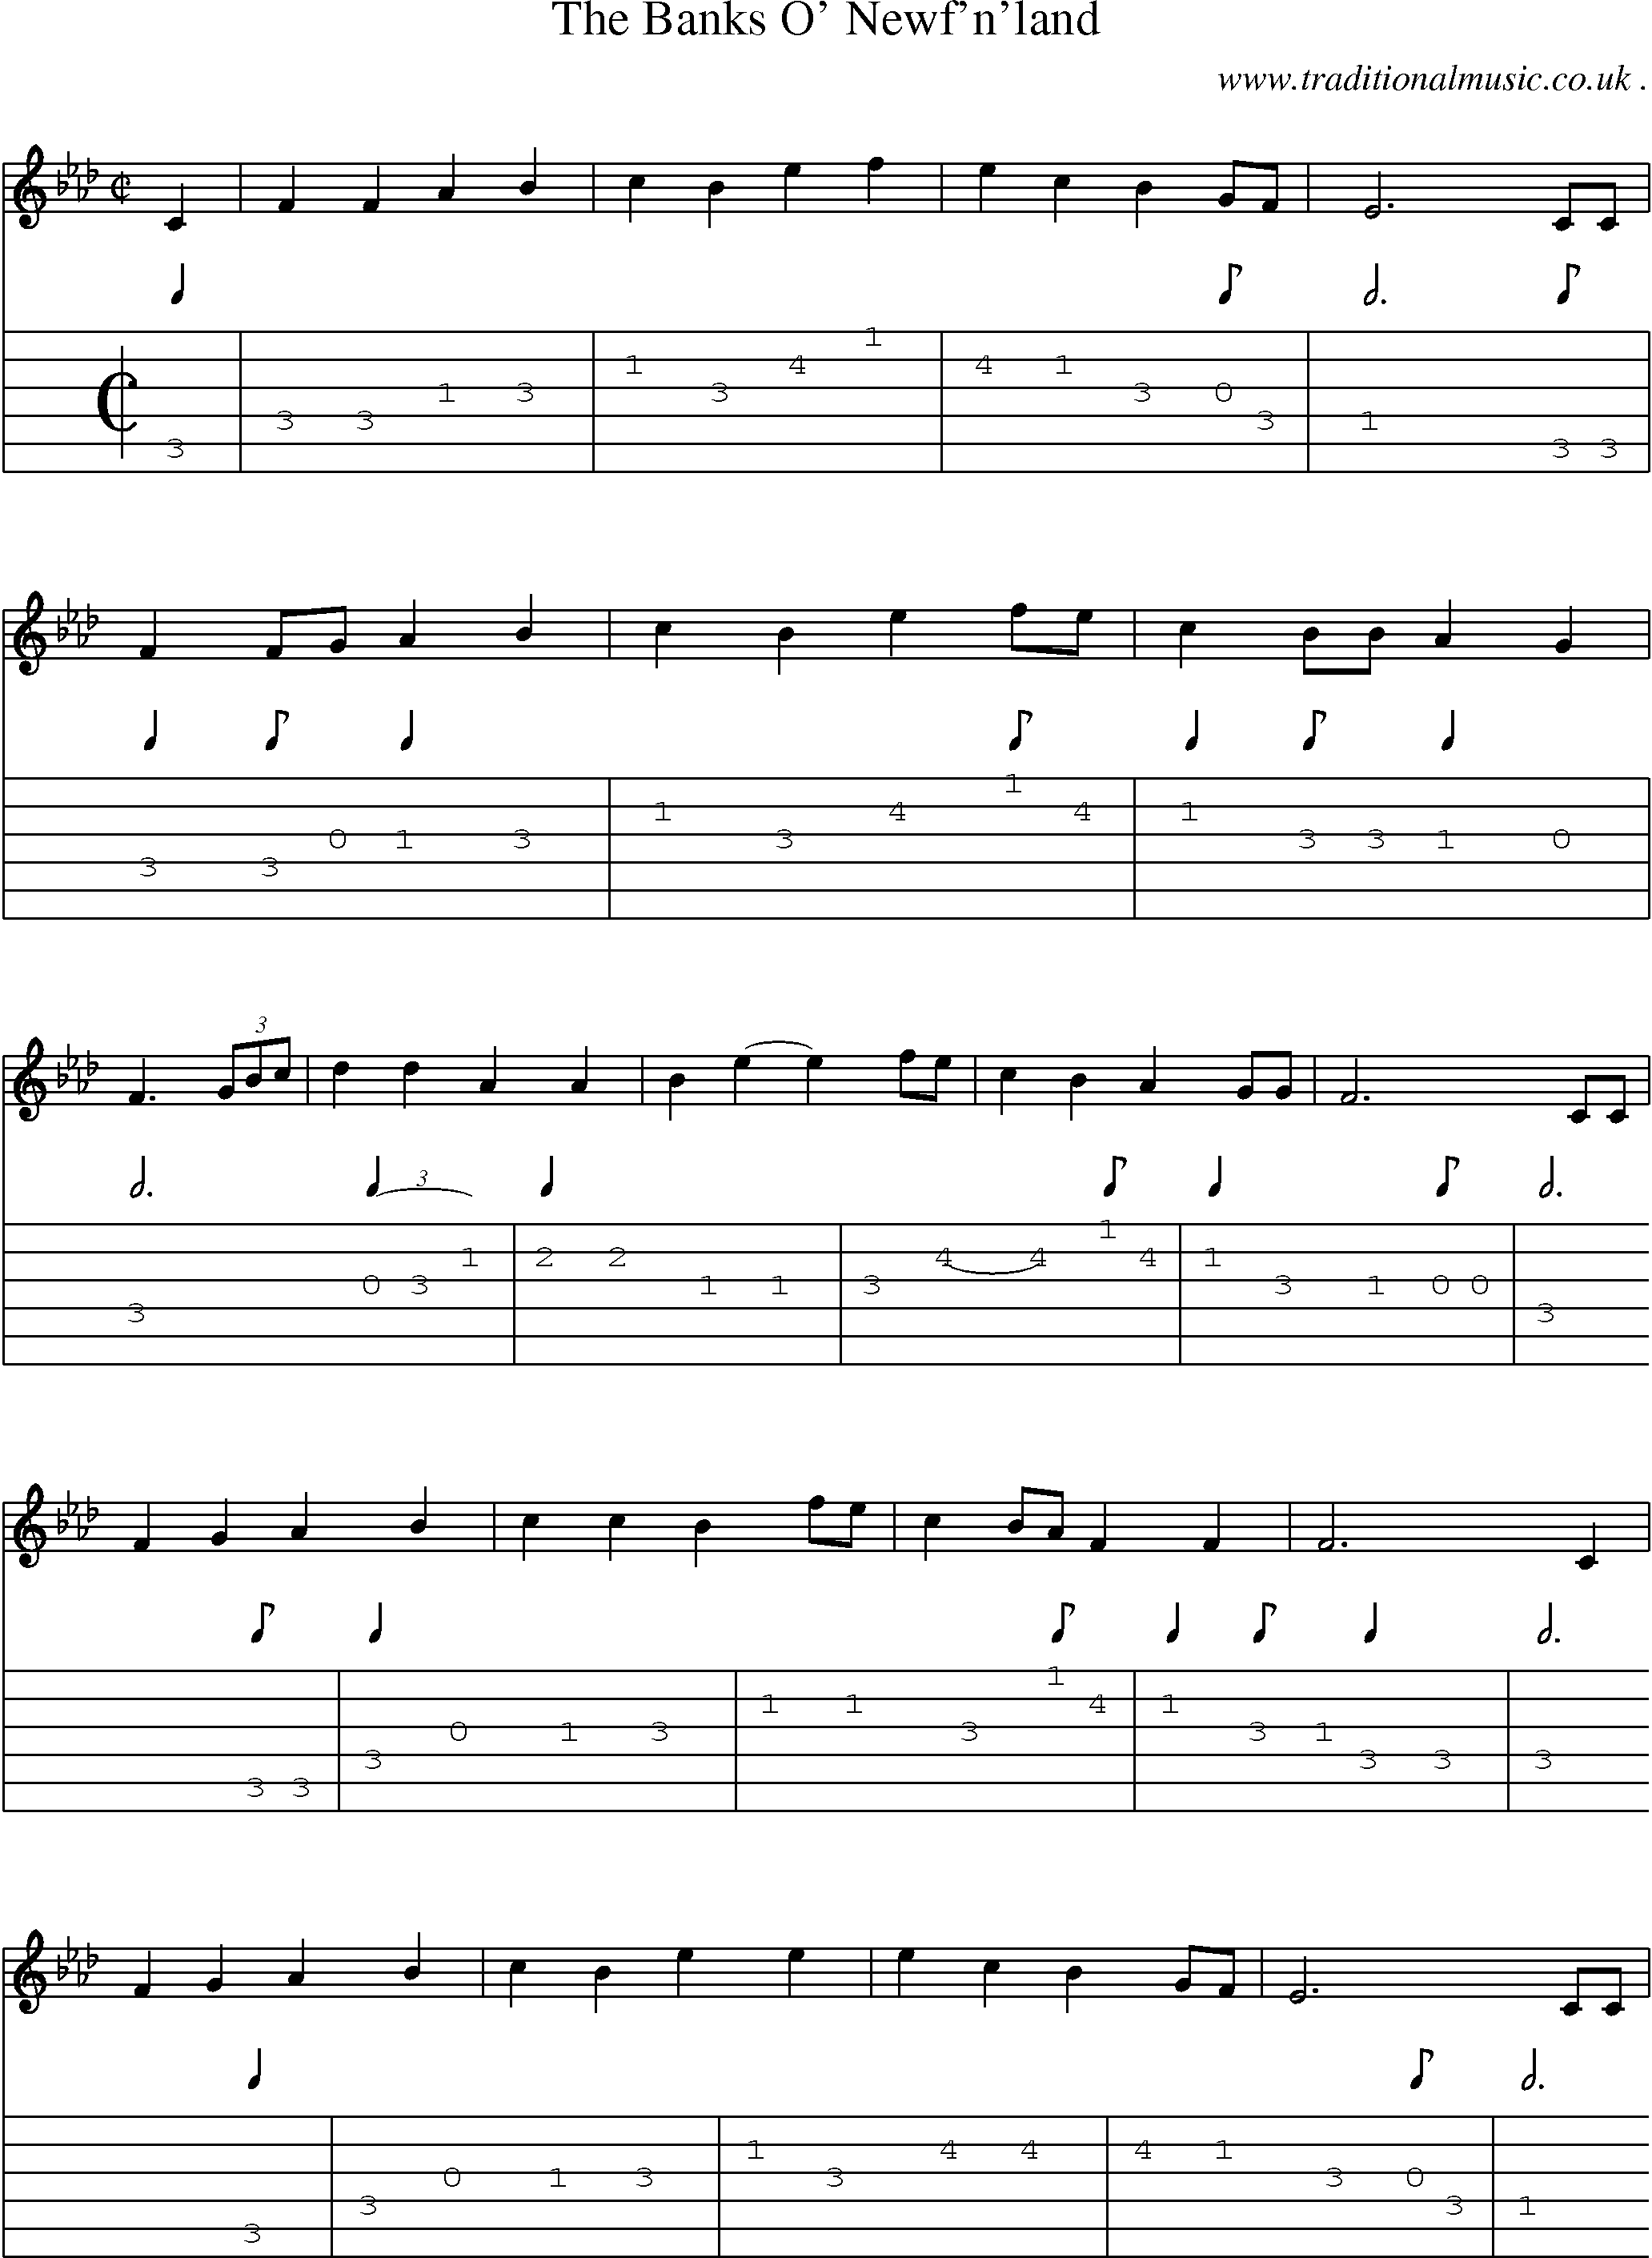 Sheet-Music and Guitar Tabs for The Banks O Newfnland